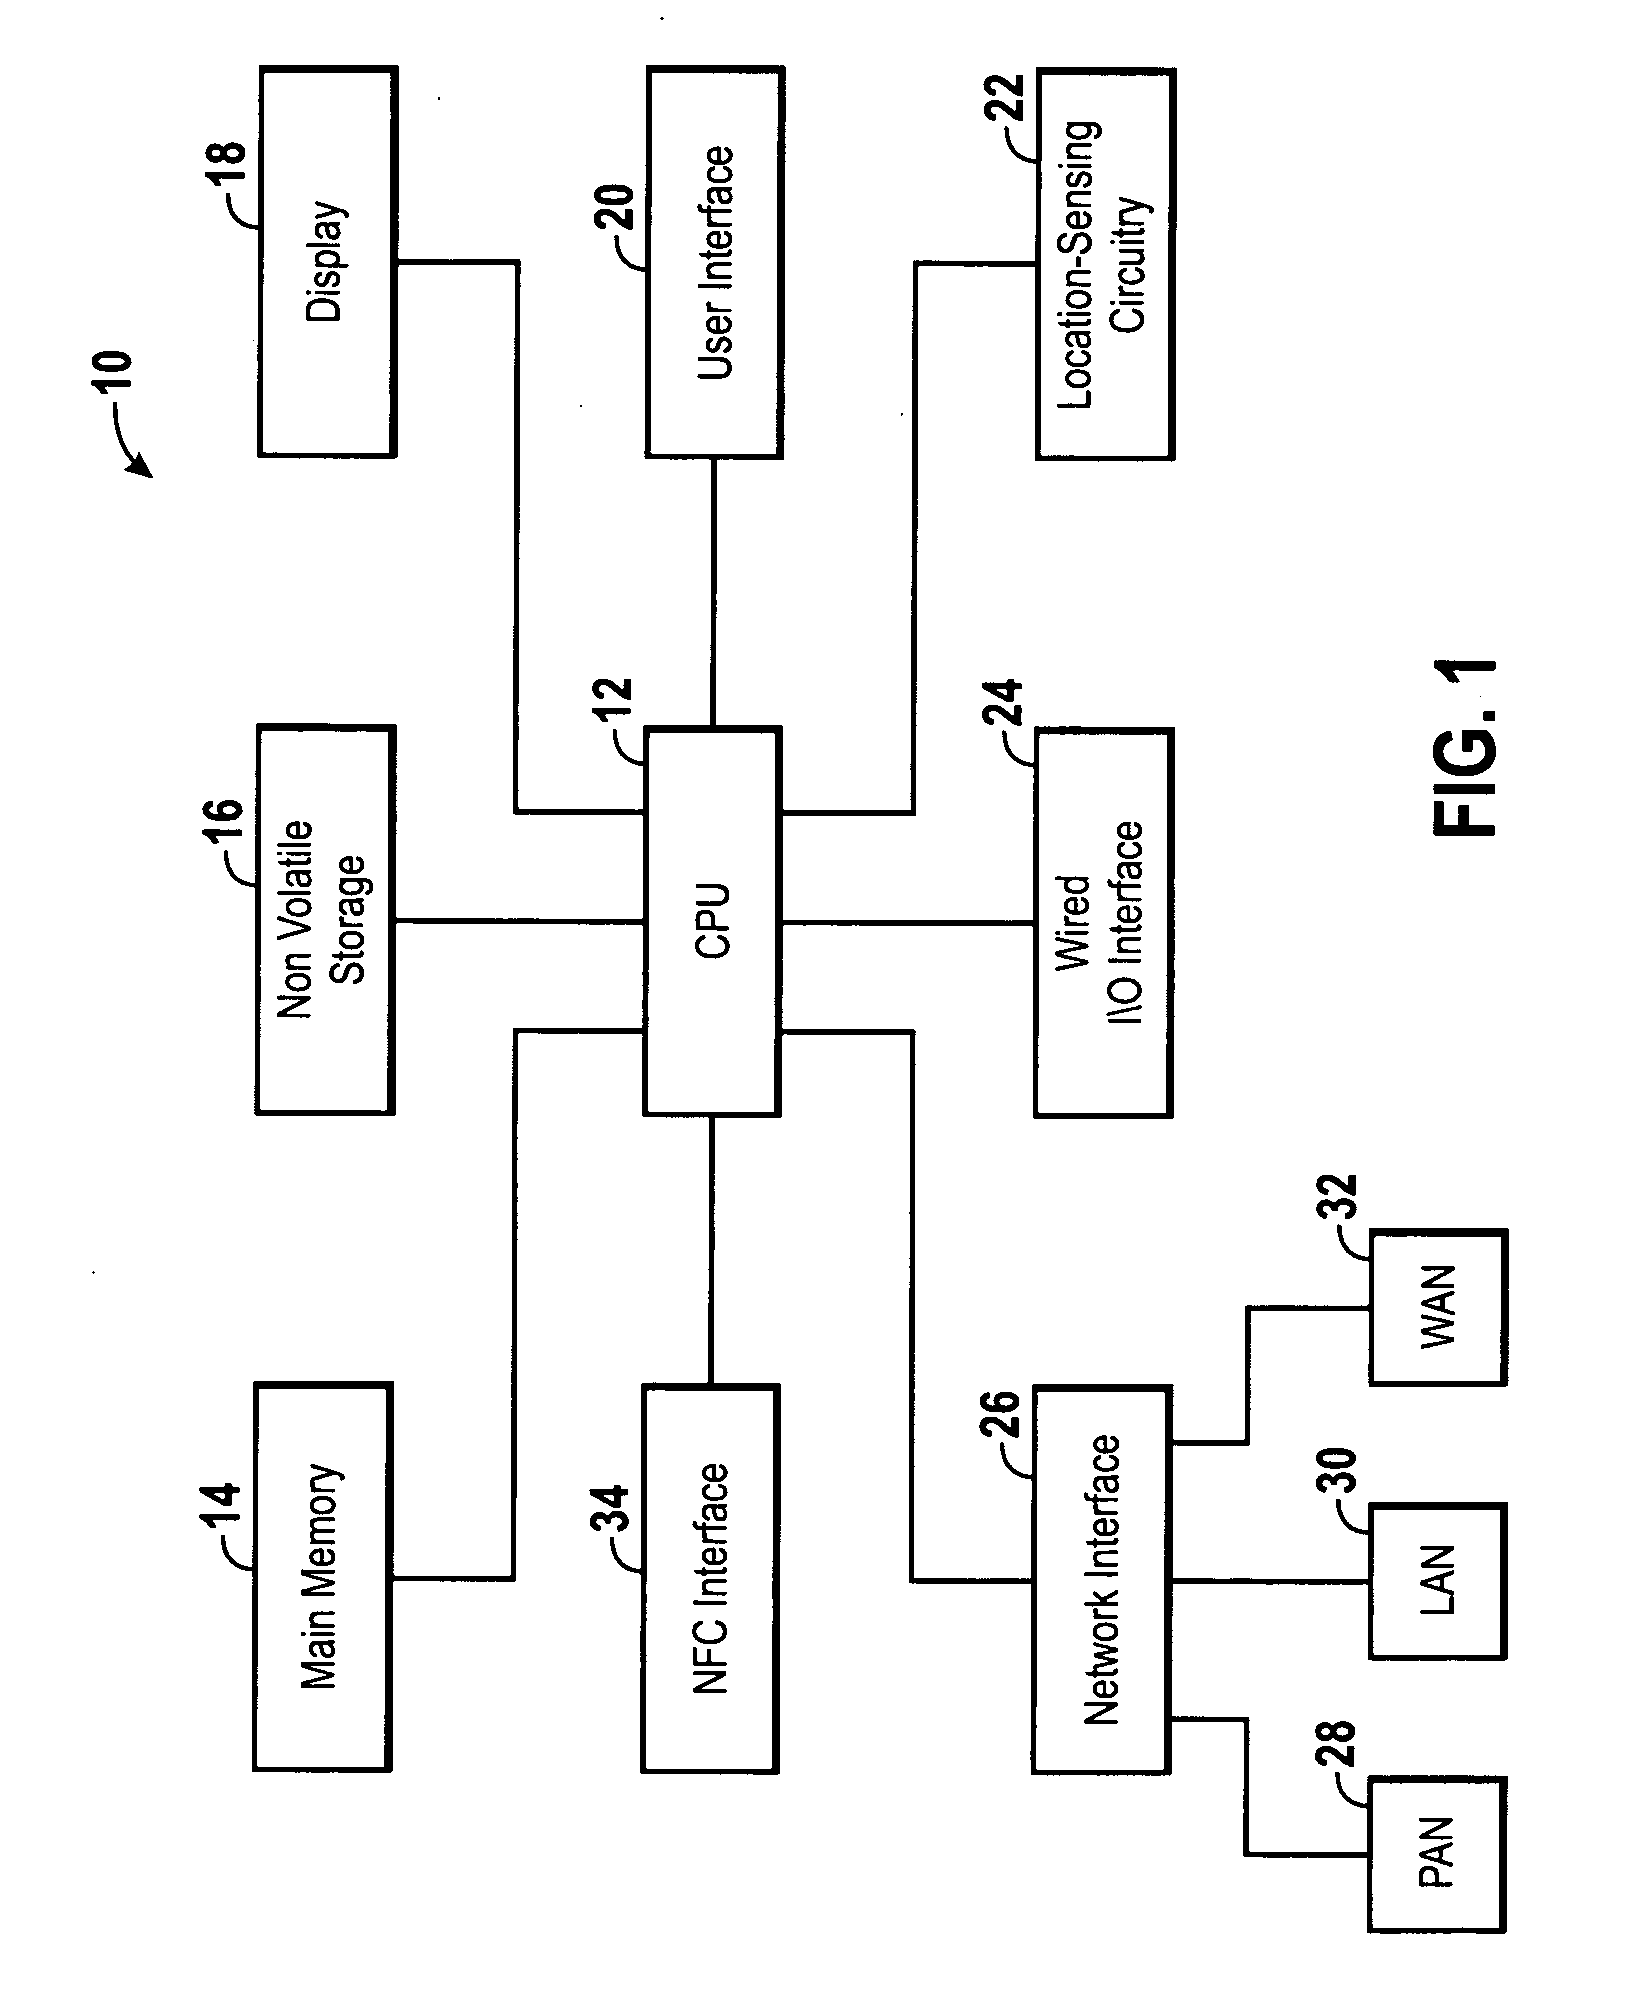 System and method for simplified data transfer